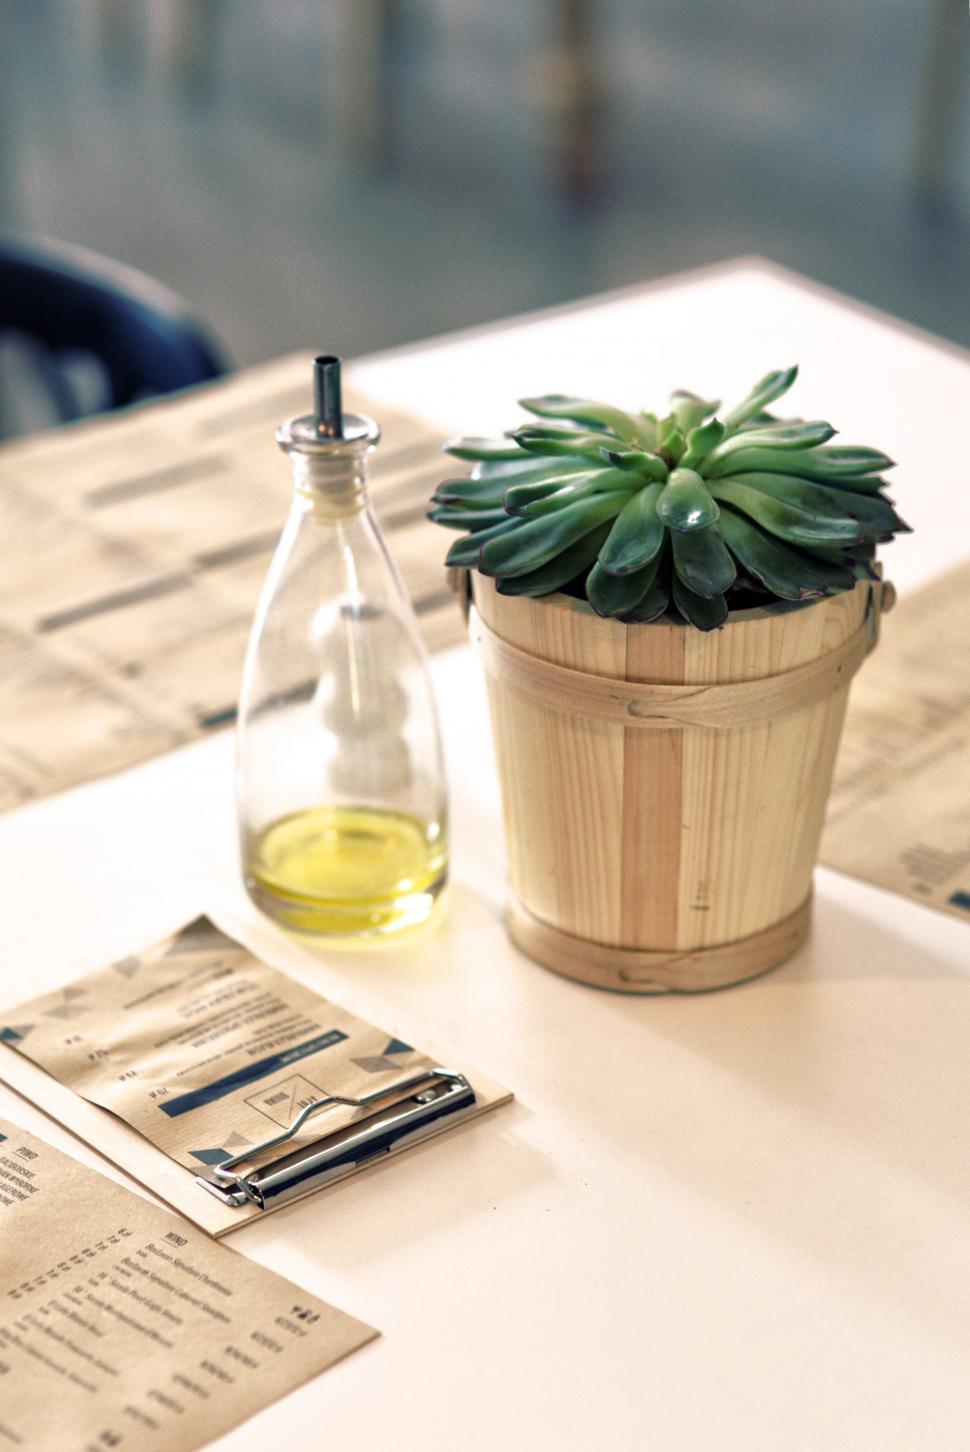 Free Image of Potted Plant on White Table 